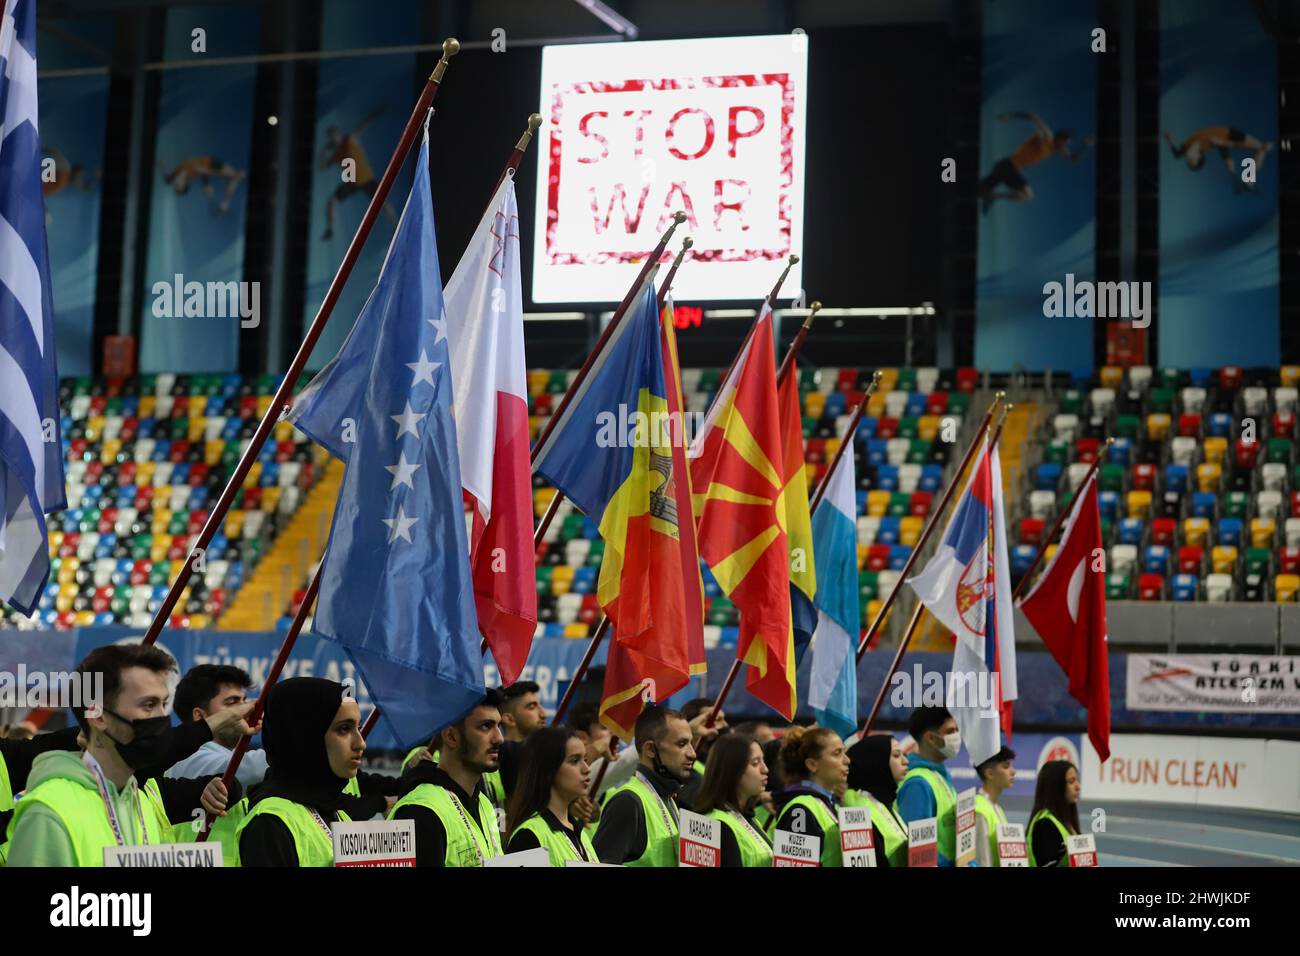 ISTANBUL, TURKEY - MARCH 05, 2022: No War sign in opening ceremony of 27th Balkan Indoor Championships. Ukrainian team could not participate in the co Stock Photo